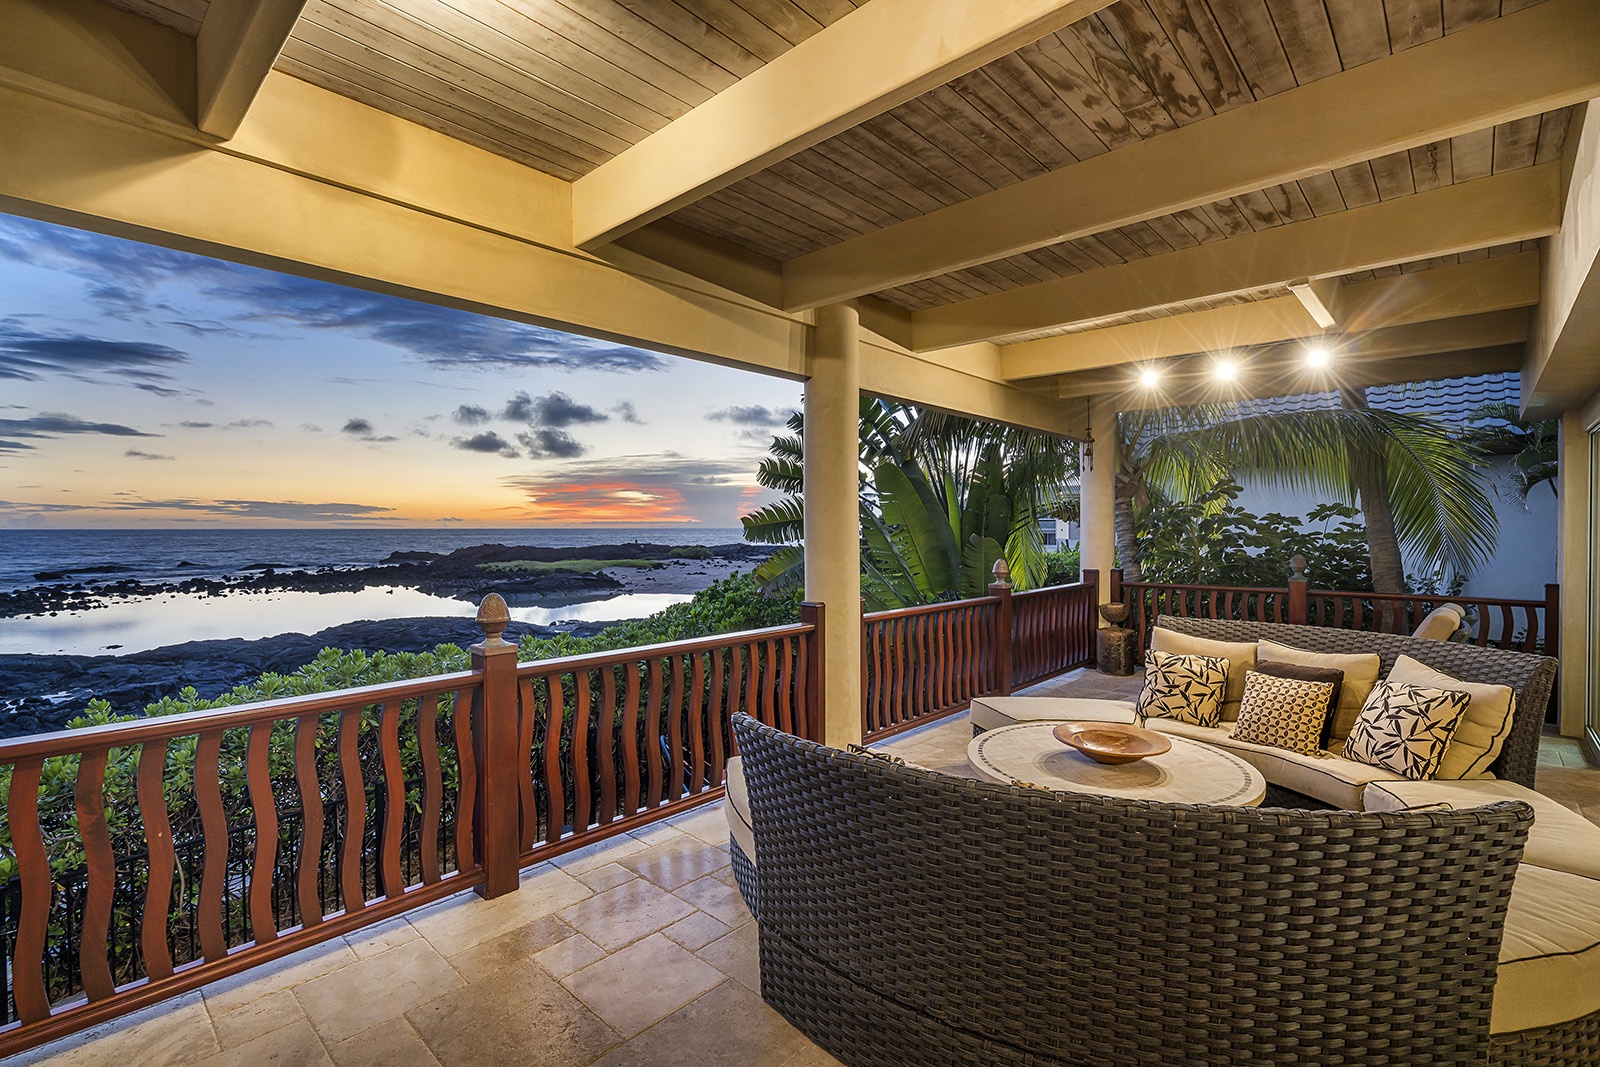 Kailua Kona Vacation Rentals, Mermaid Cove - Relaxing sunsets nightly!